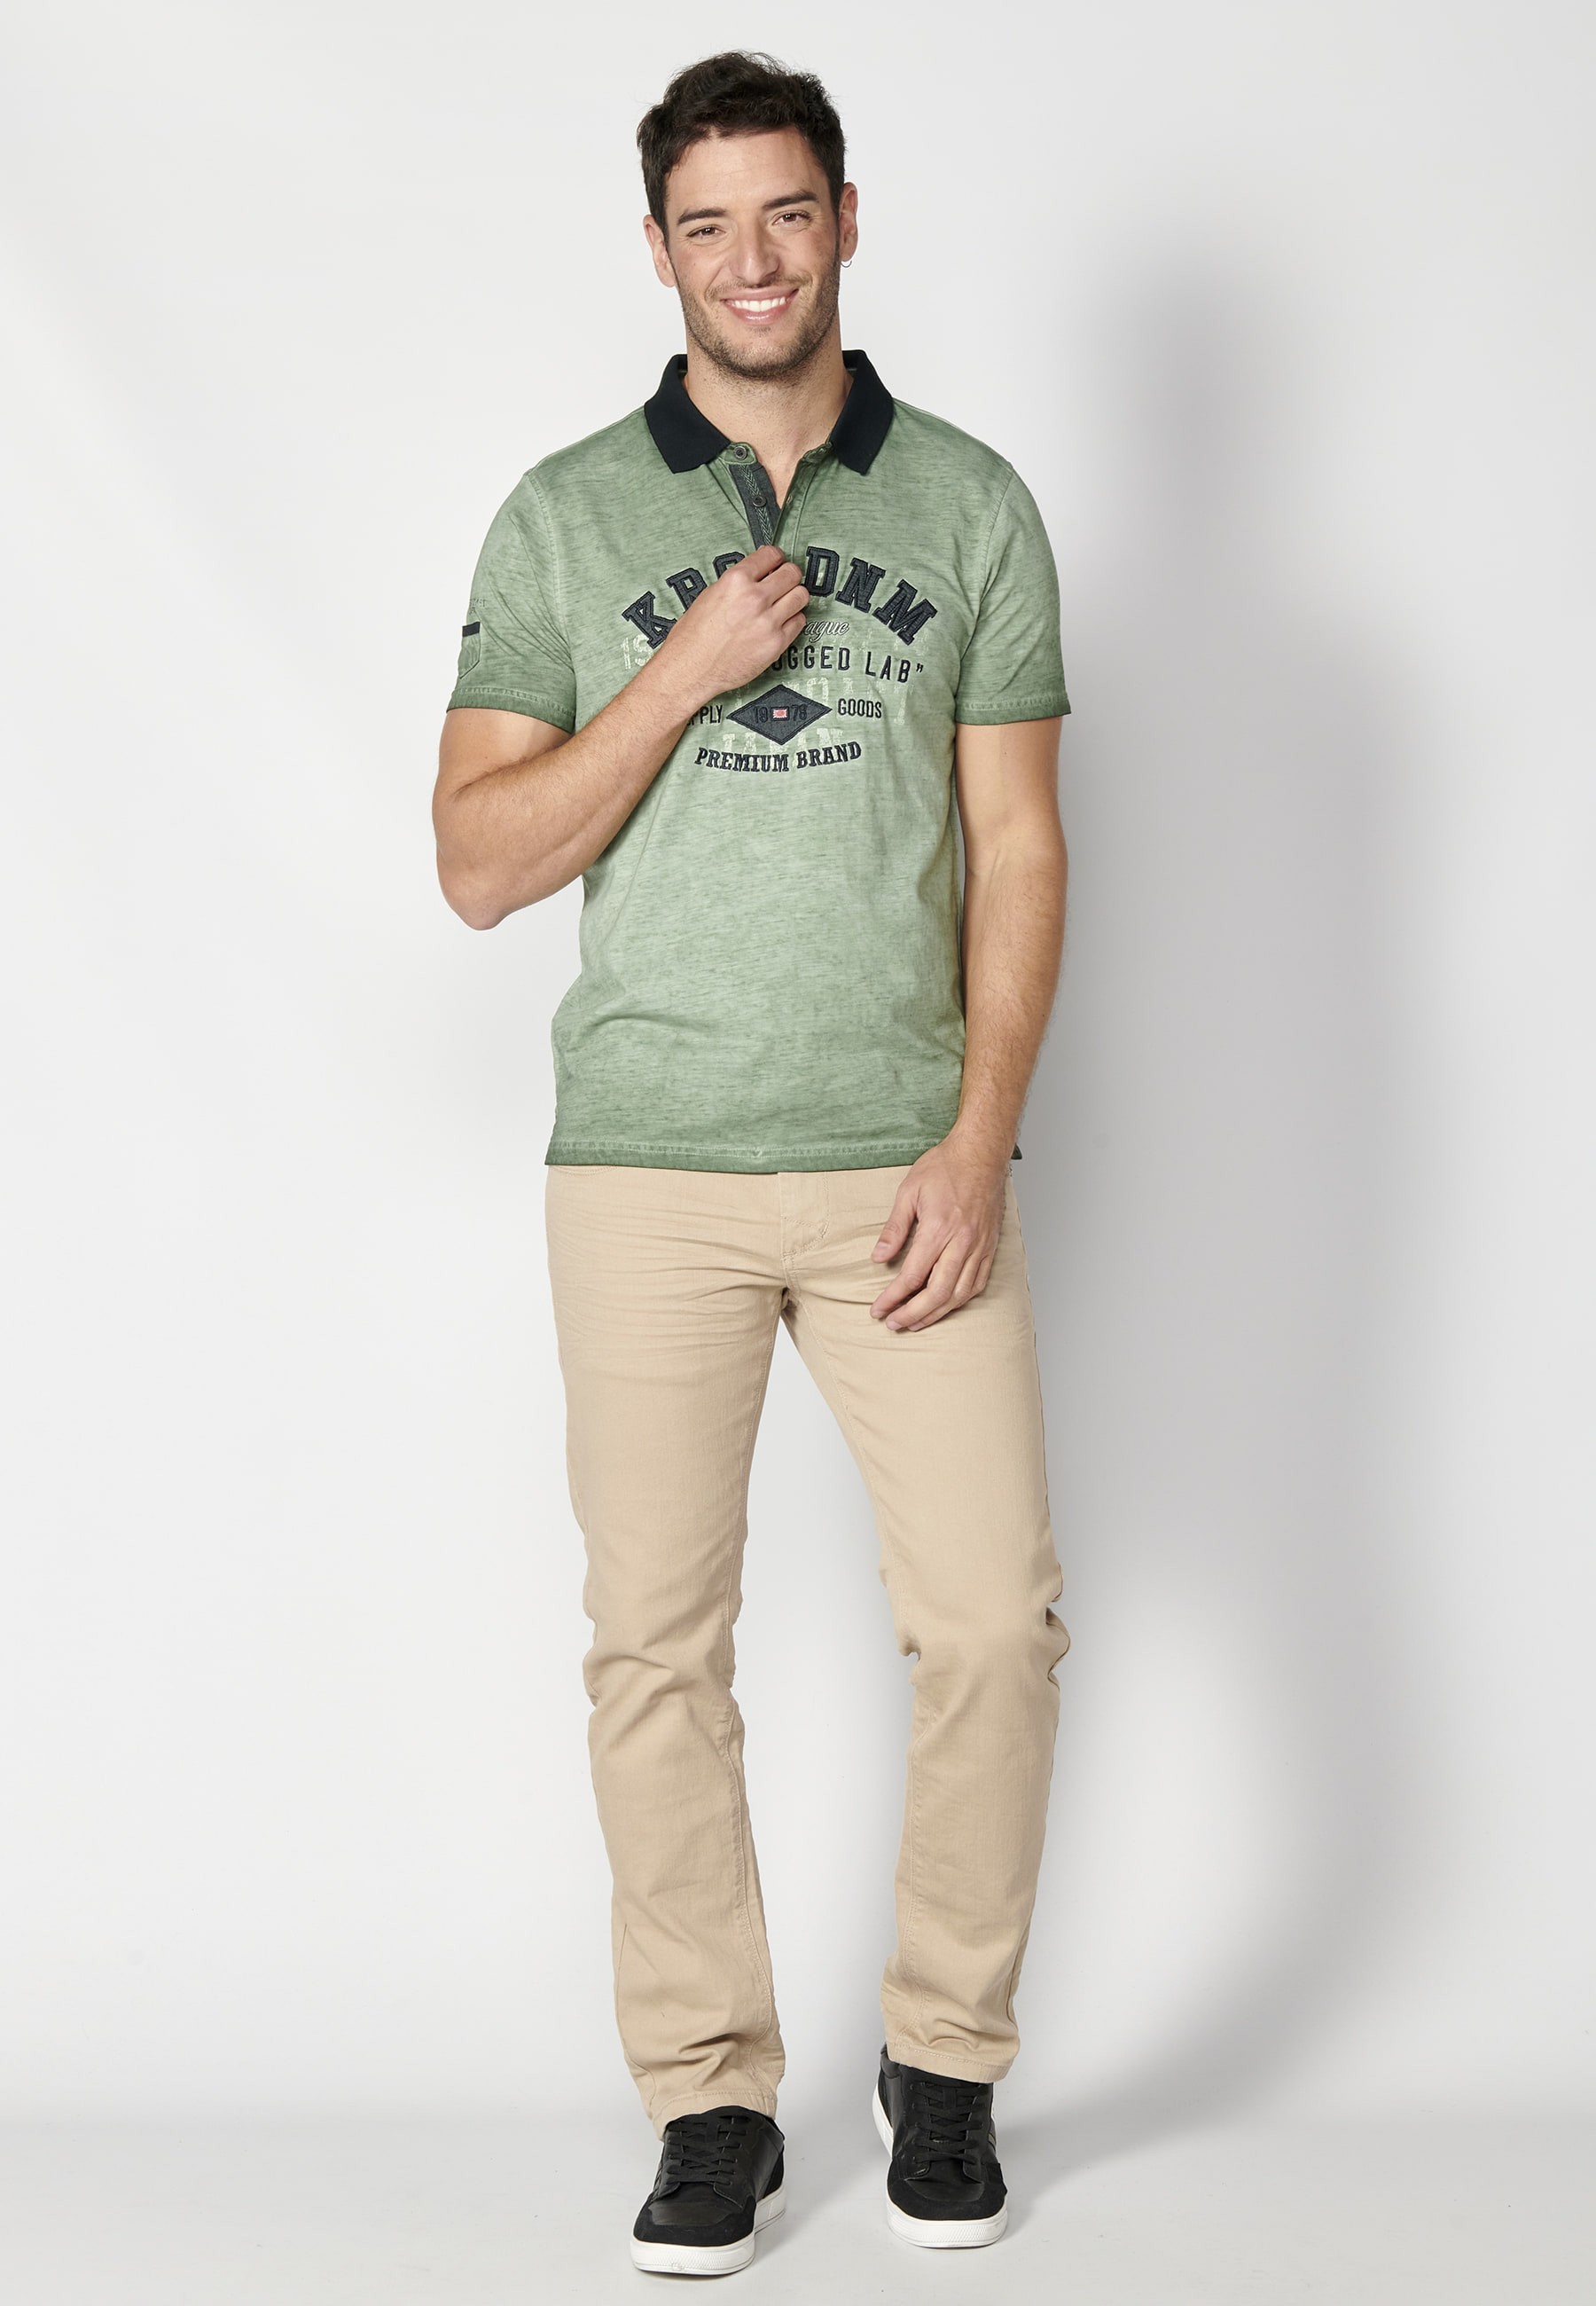 Khaki short-sleeved Cotton polo shirt with text print for Men